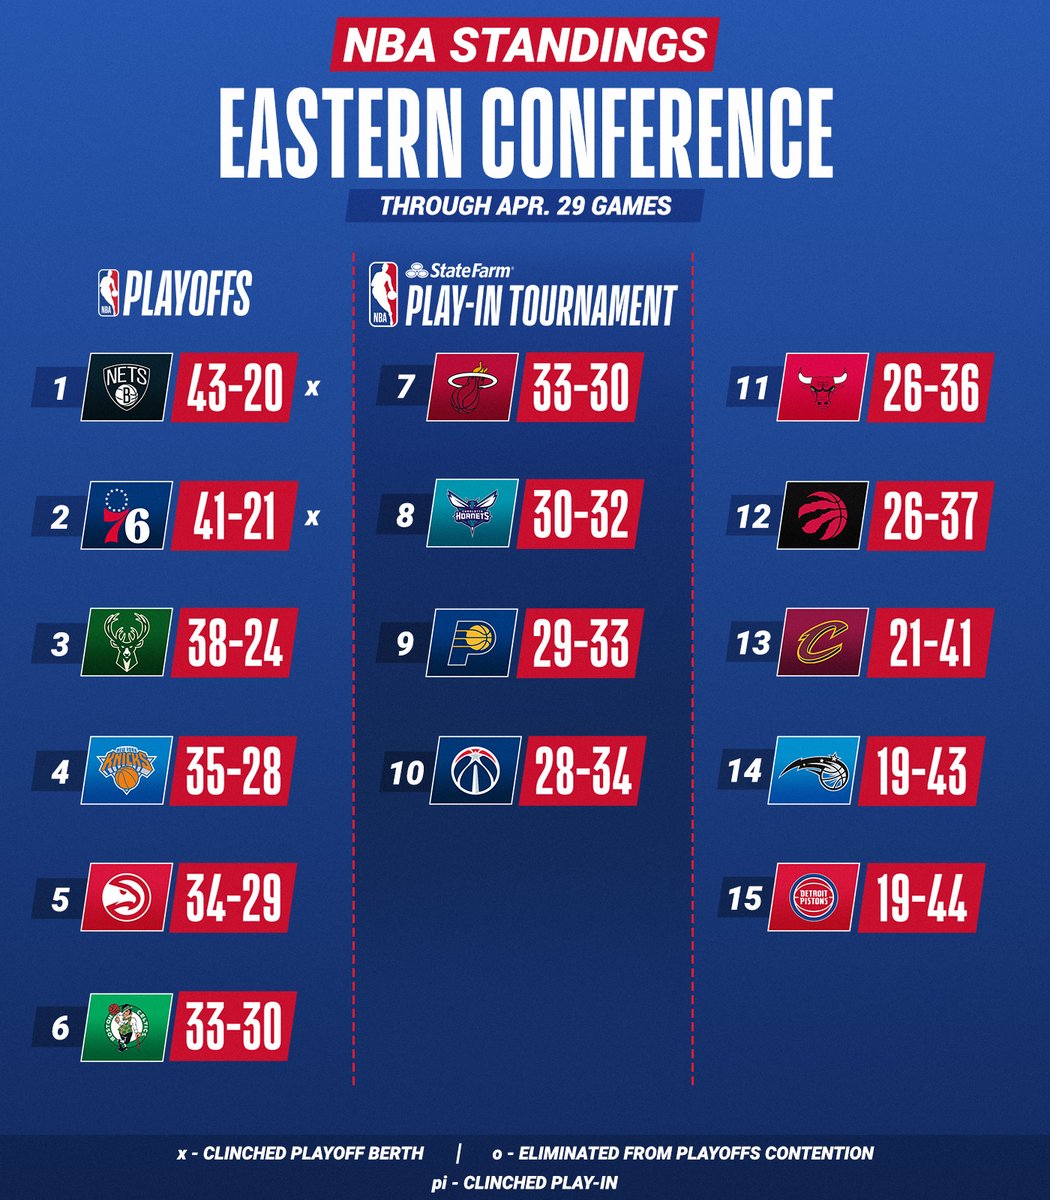 Nba Western And Eastern Conference Standings 2021 - nbabv